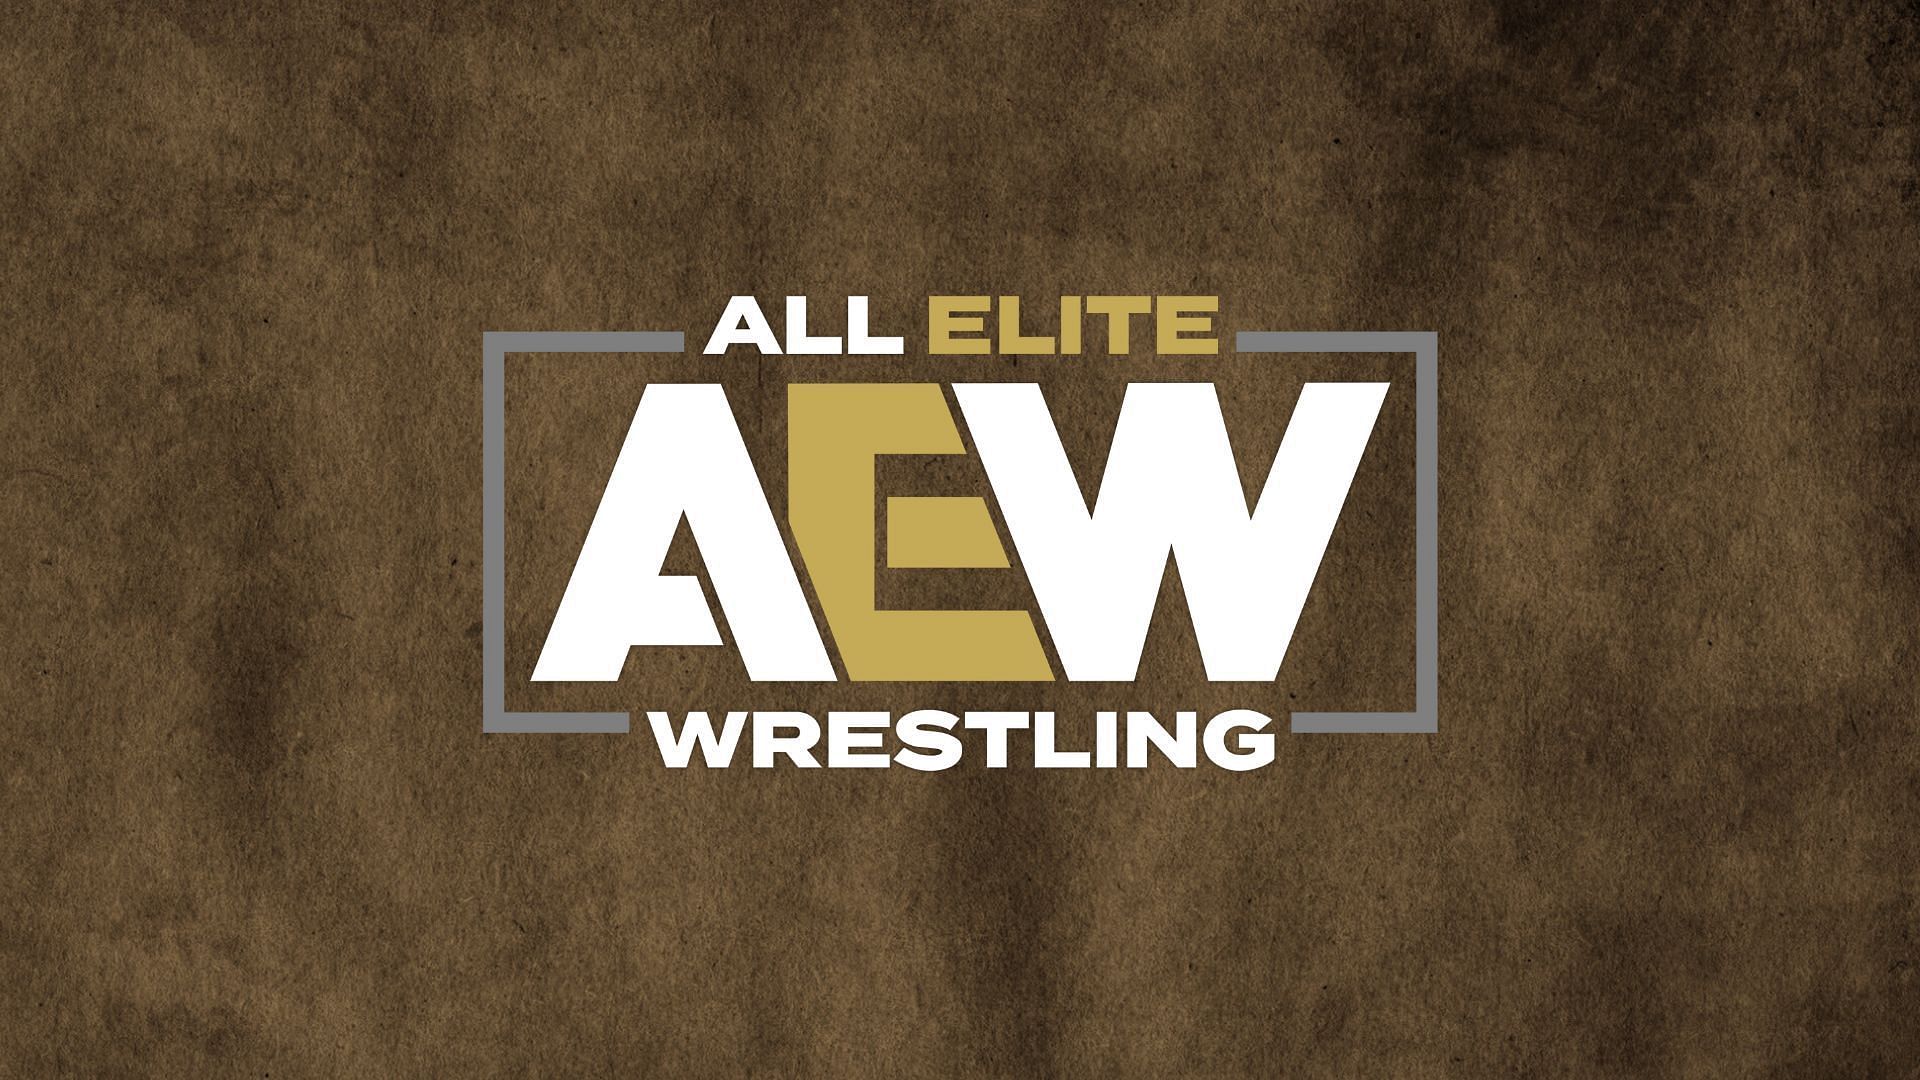 All Elite Wrestling was founded by Tony Khan in 2019